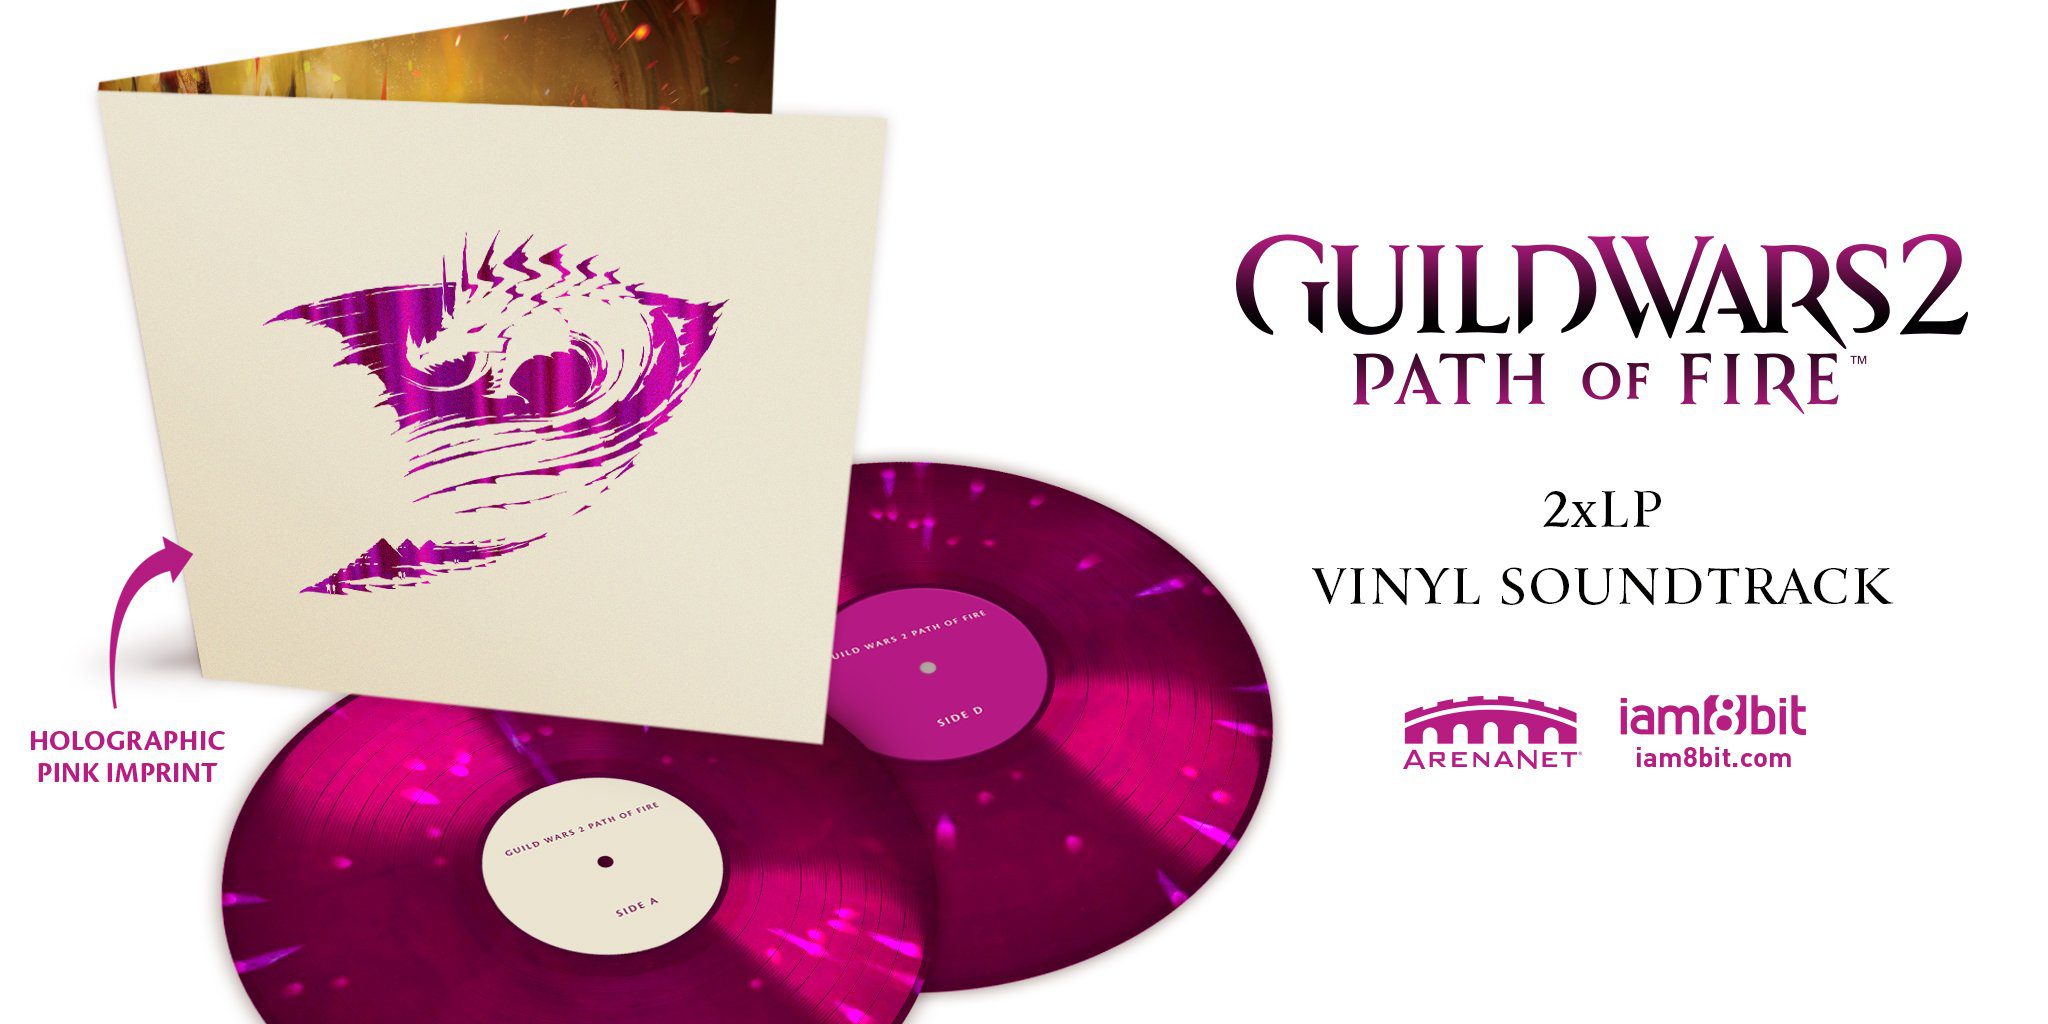 Vinyl Pre-Orders Open for Guild Wars 2: Path of Fire’s Orchestral Soundtrack